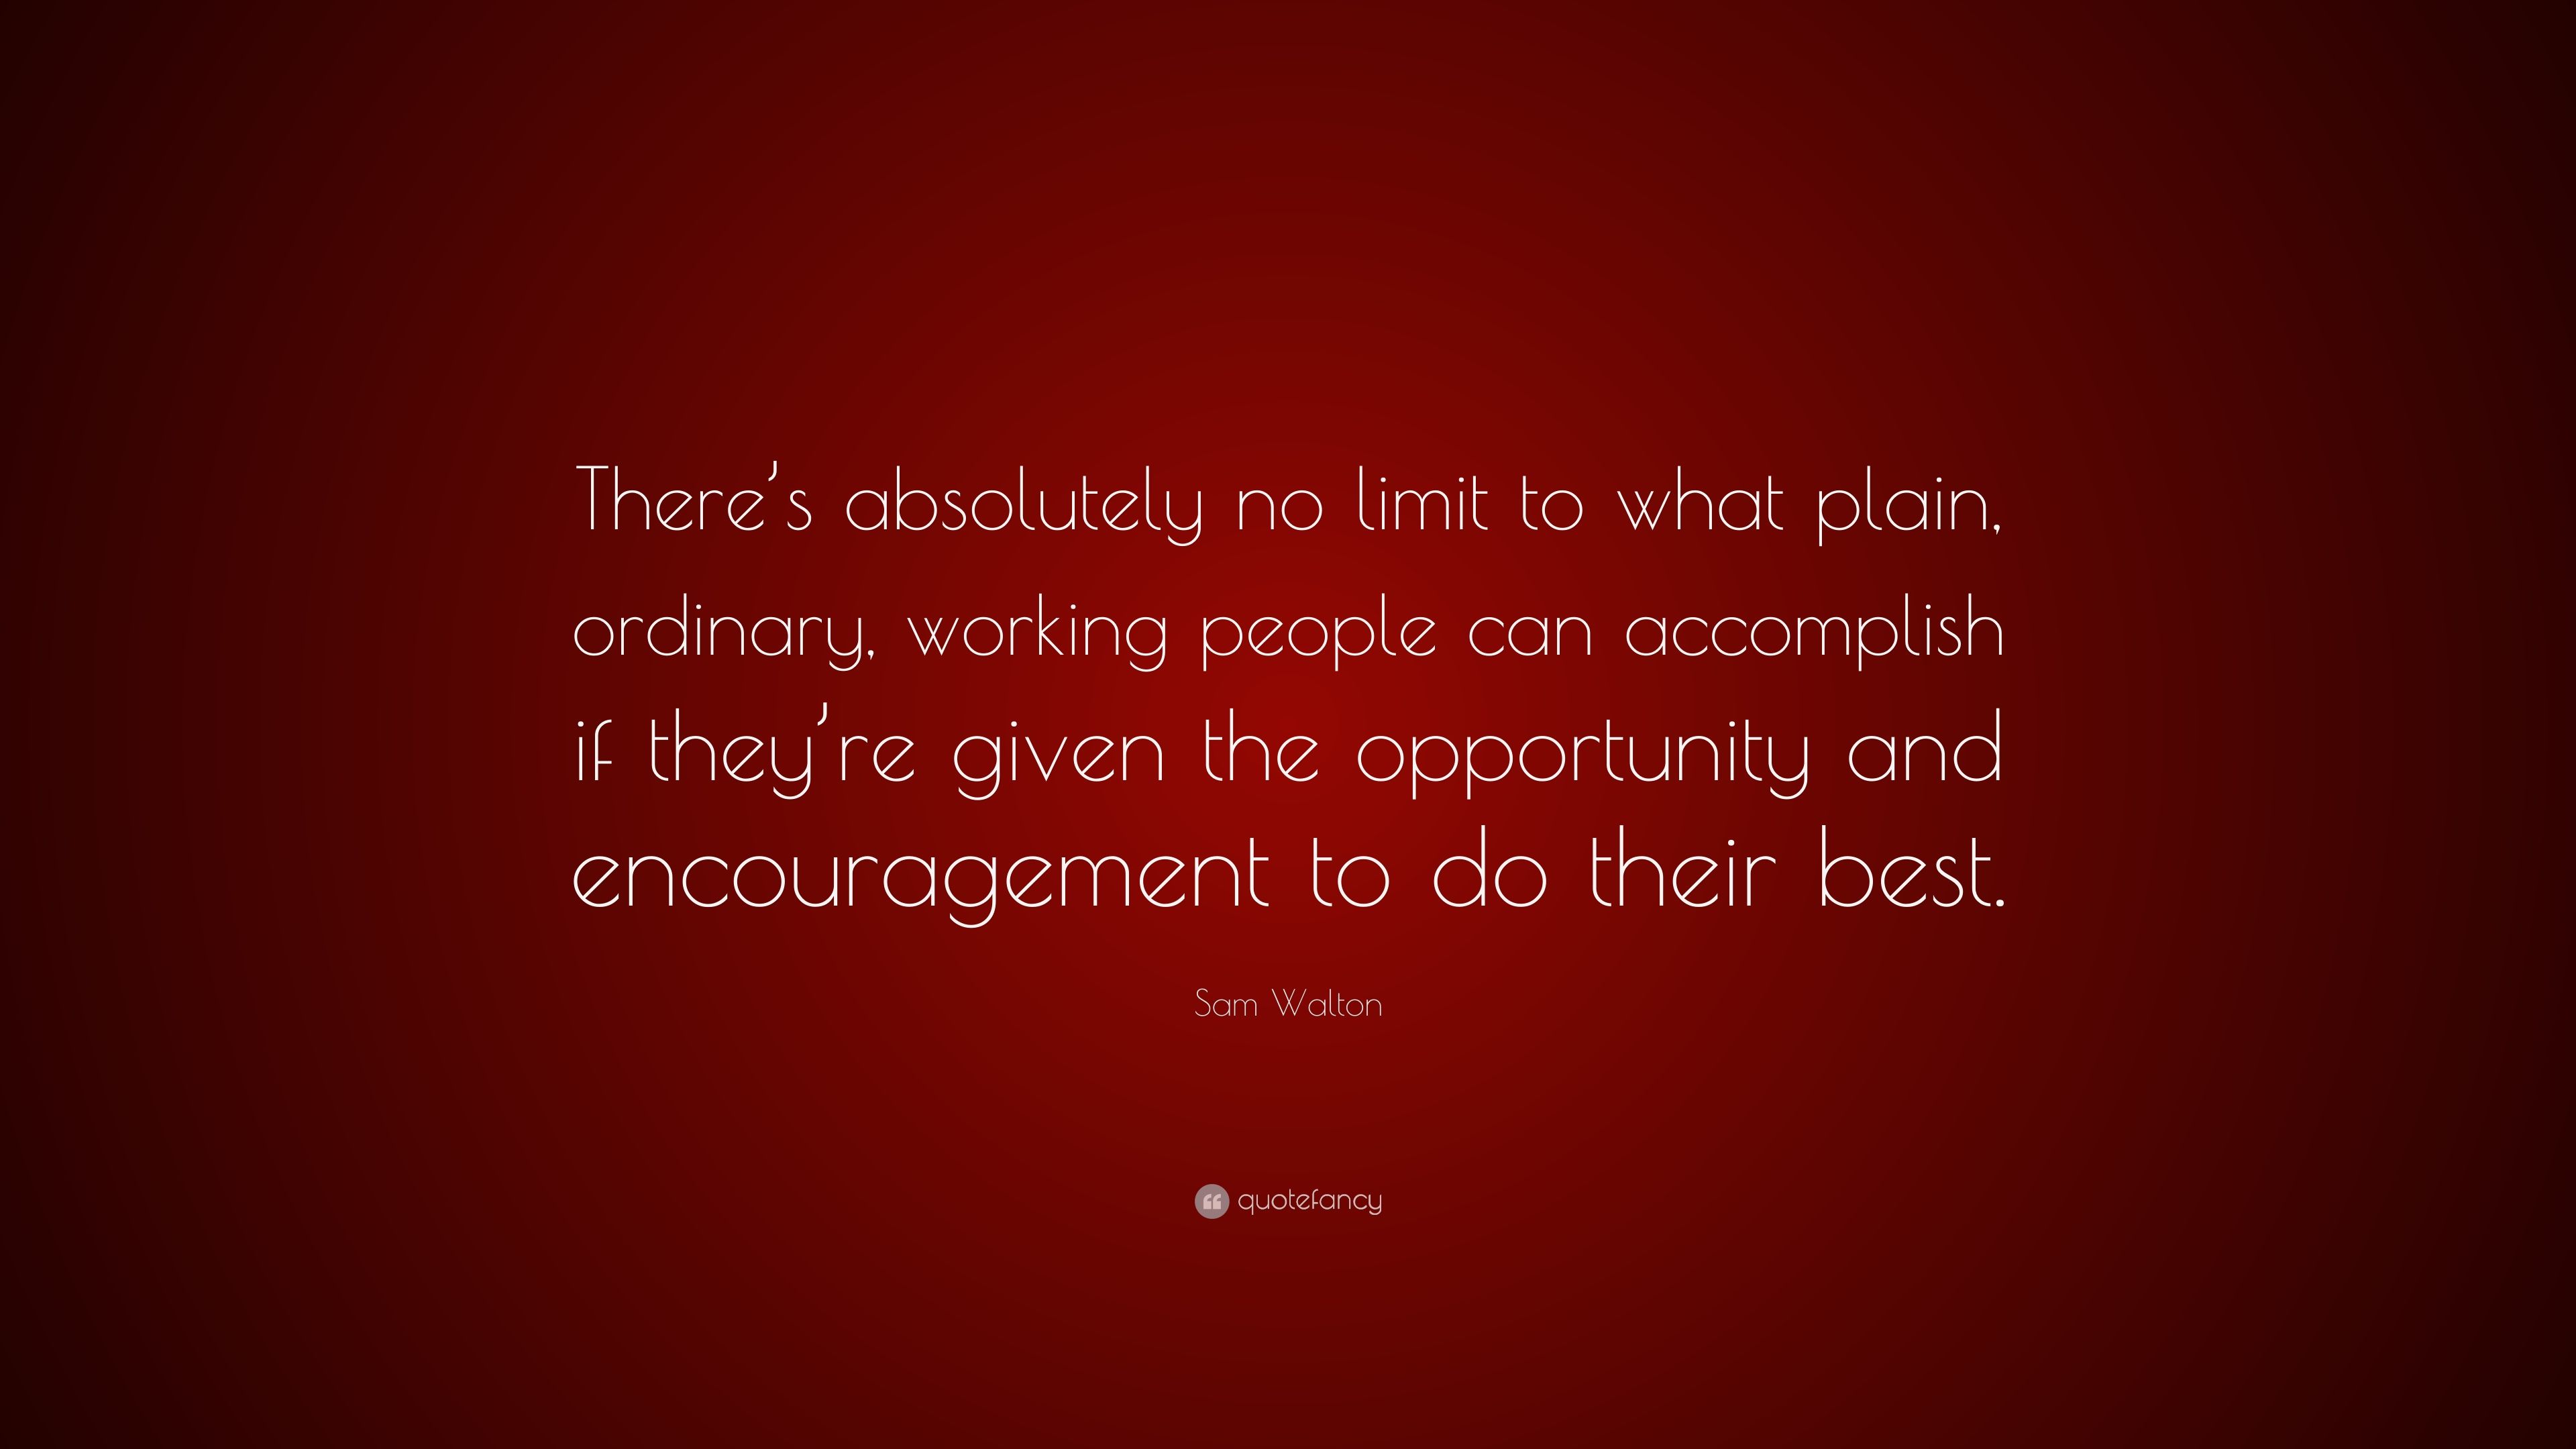 Sam Walton Quote: “There's absolutely no limit to what plain